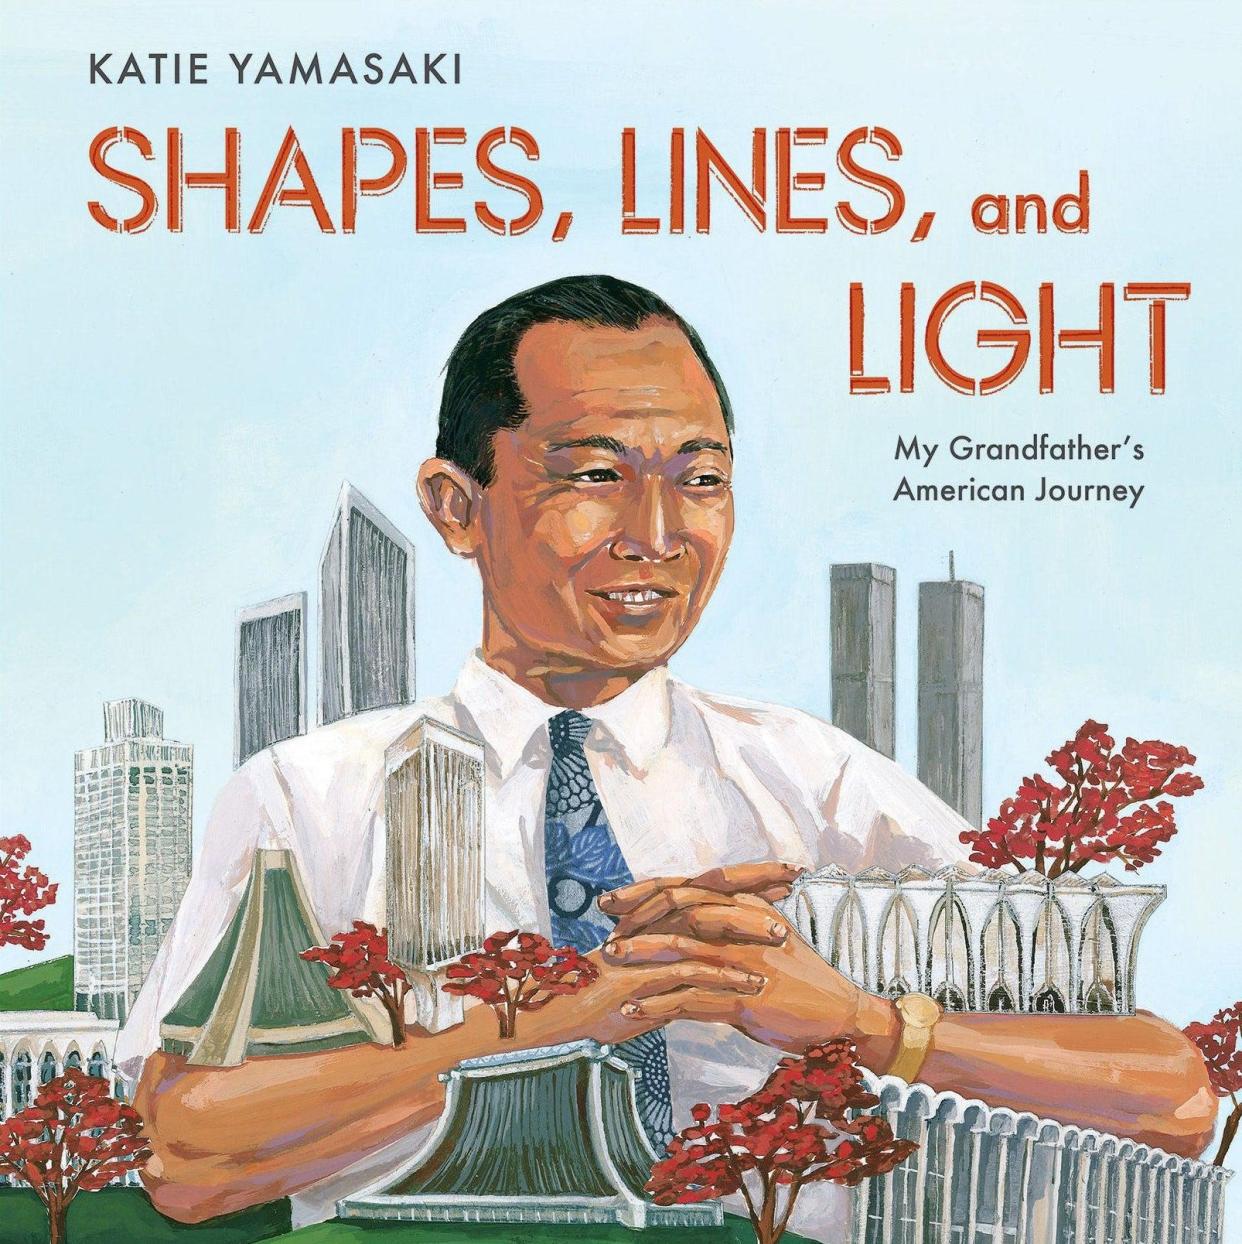 Katie Yamasaki, author of “Shapes, Lines and Light; My Grandfather’s American Journey,” will speak at 6:30 p.m. May 18 in the Airport High School Library, 11330 Grafton Road.